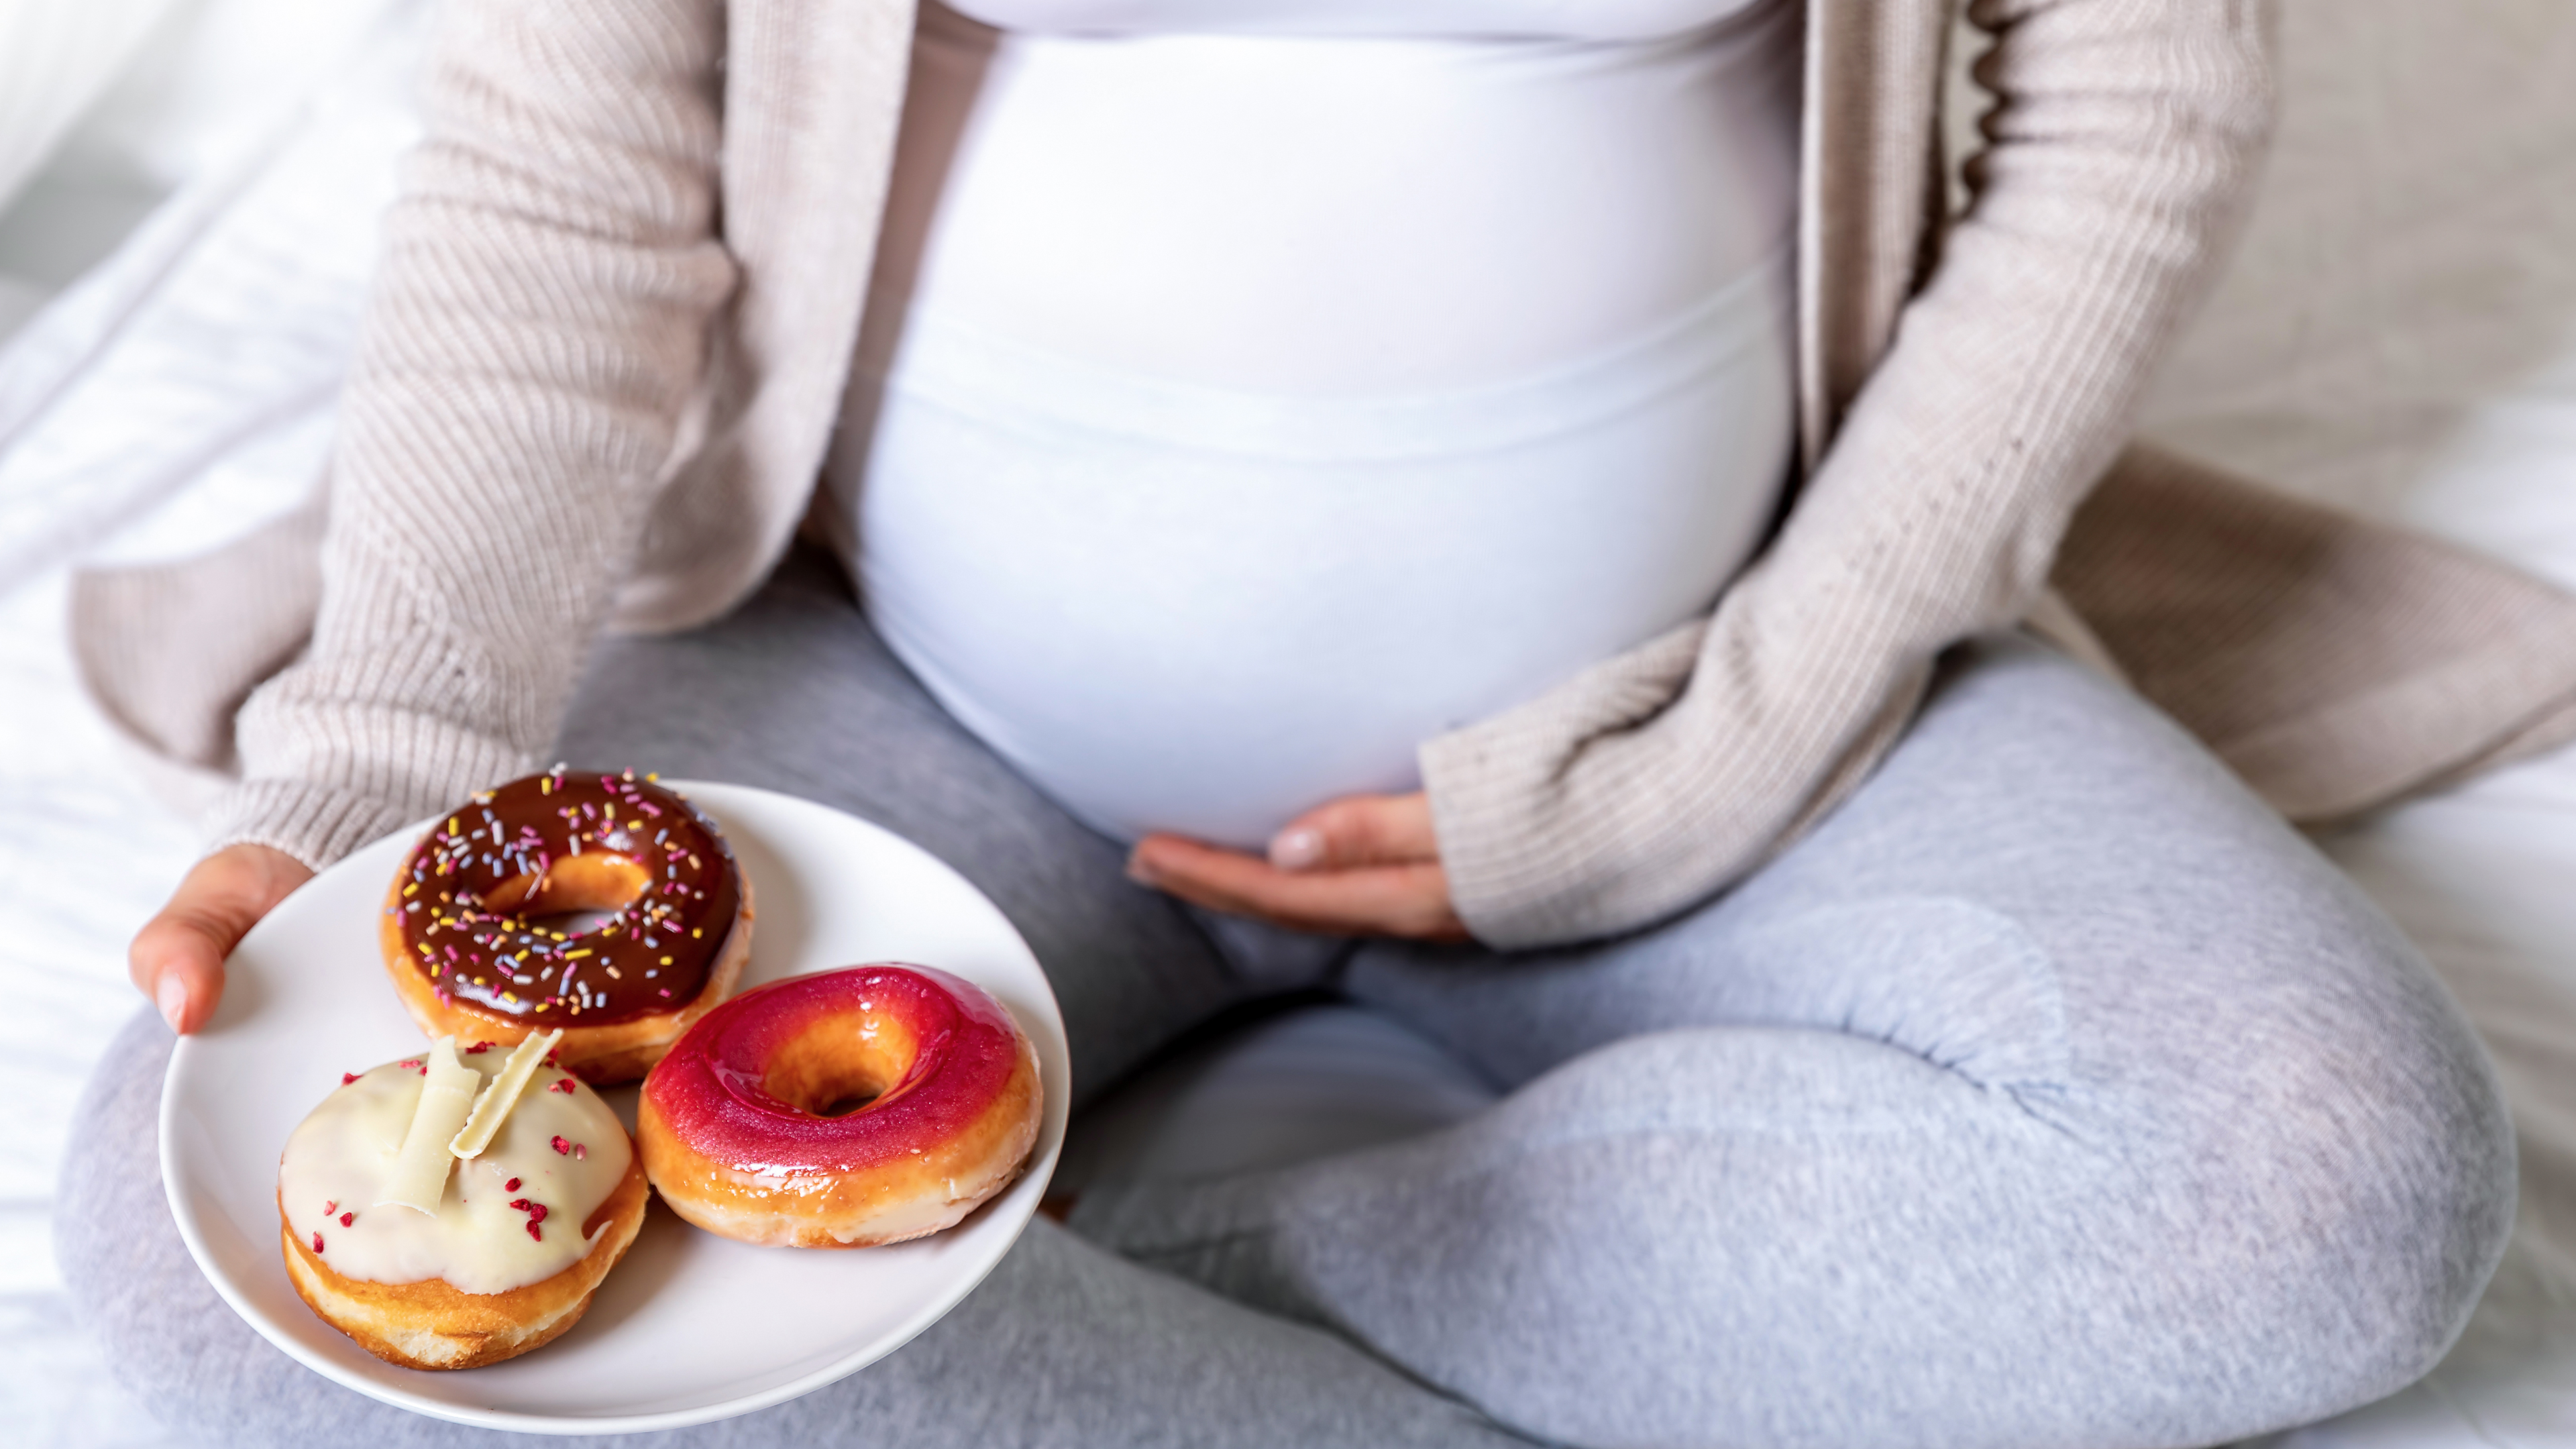 Pregnant woman holding her belly and a plate of donuts